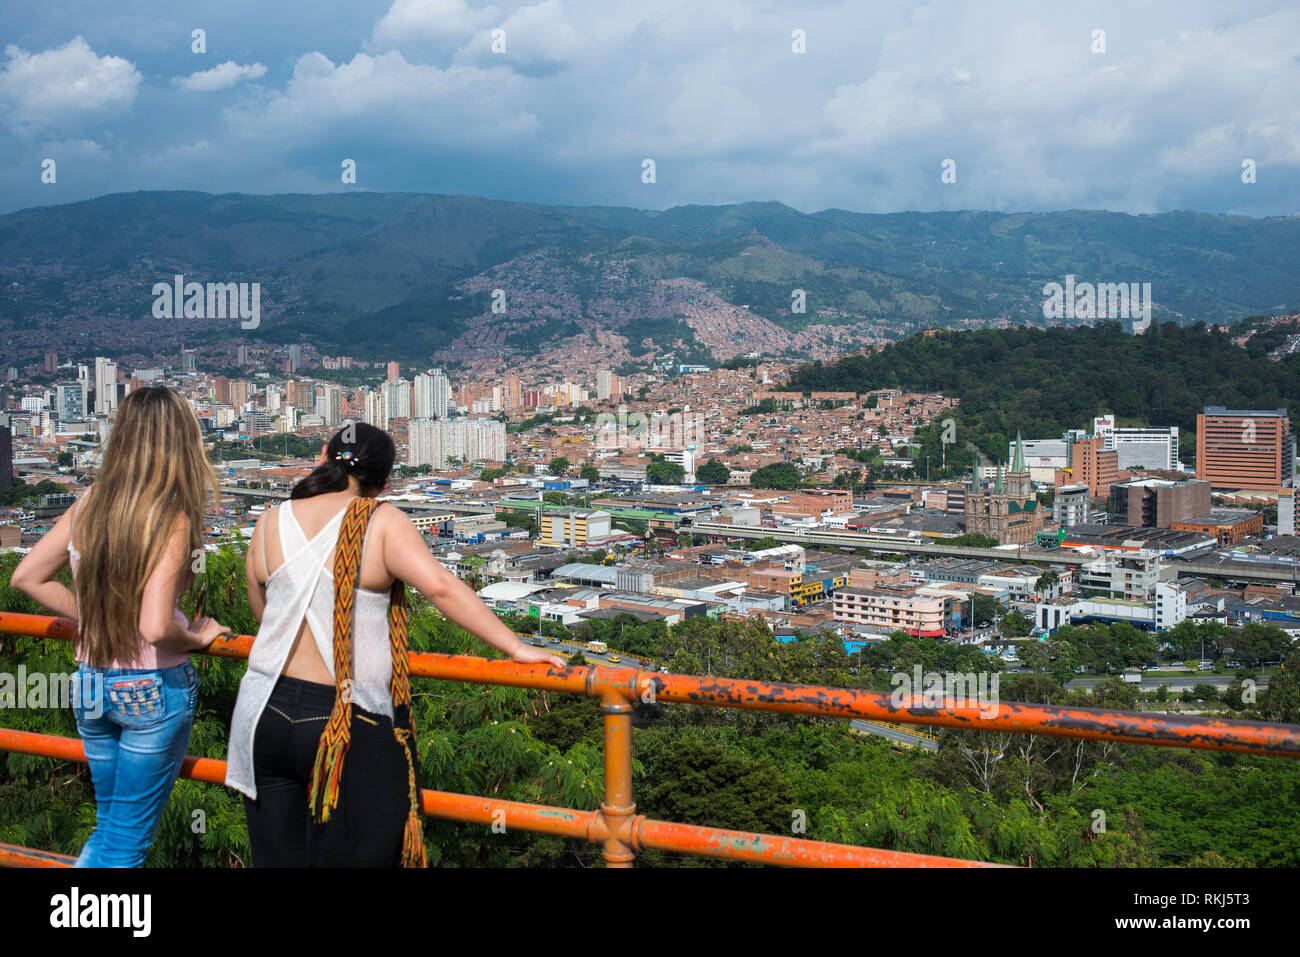 Medellin, Antioquia, Colombia: overview of downtown from Cerro Nutibara. Stock Photo